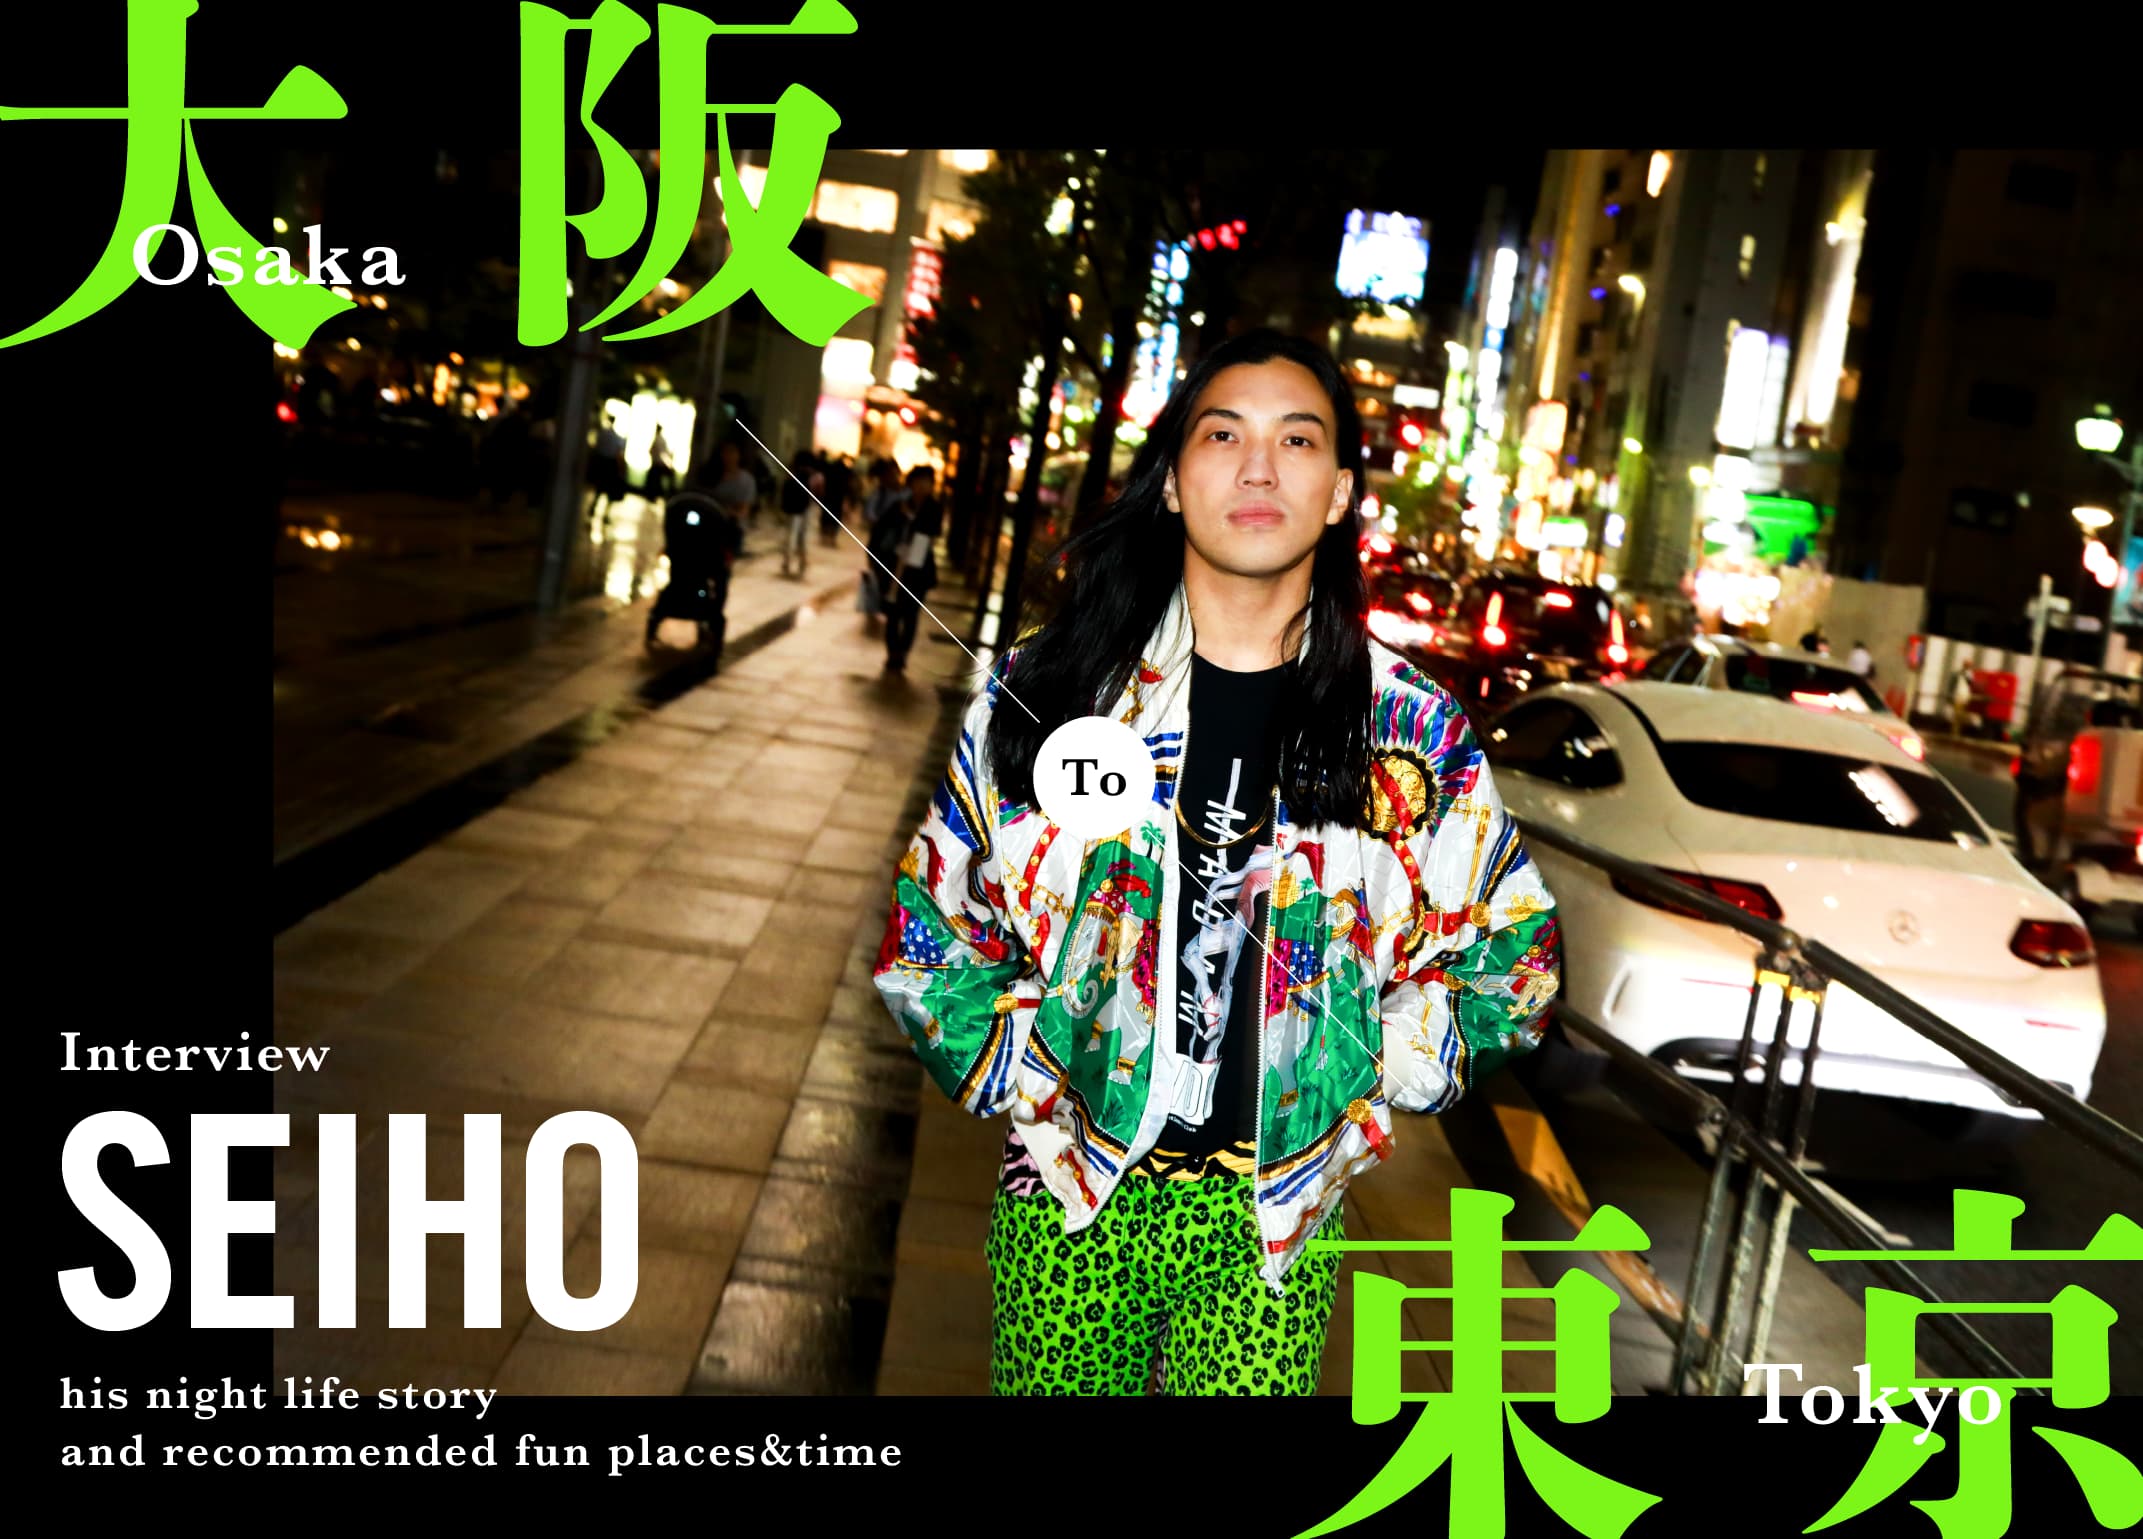 Osaka to Tokyo, Seiho his night life story and recommended fun places&time.